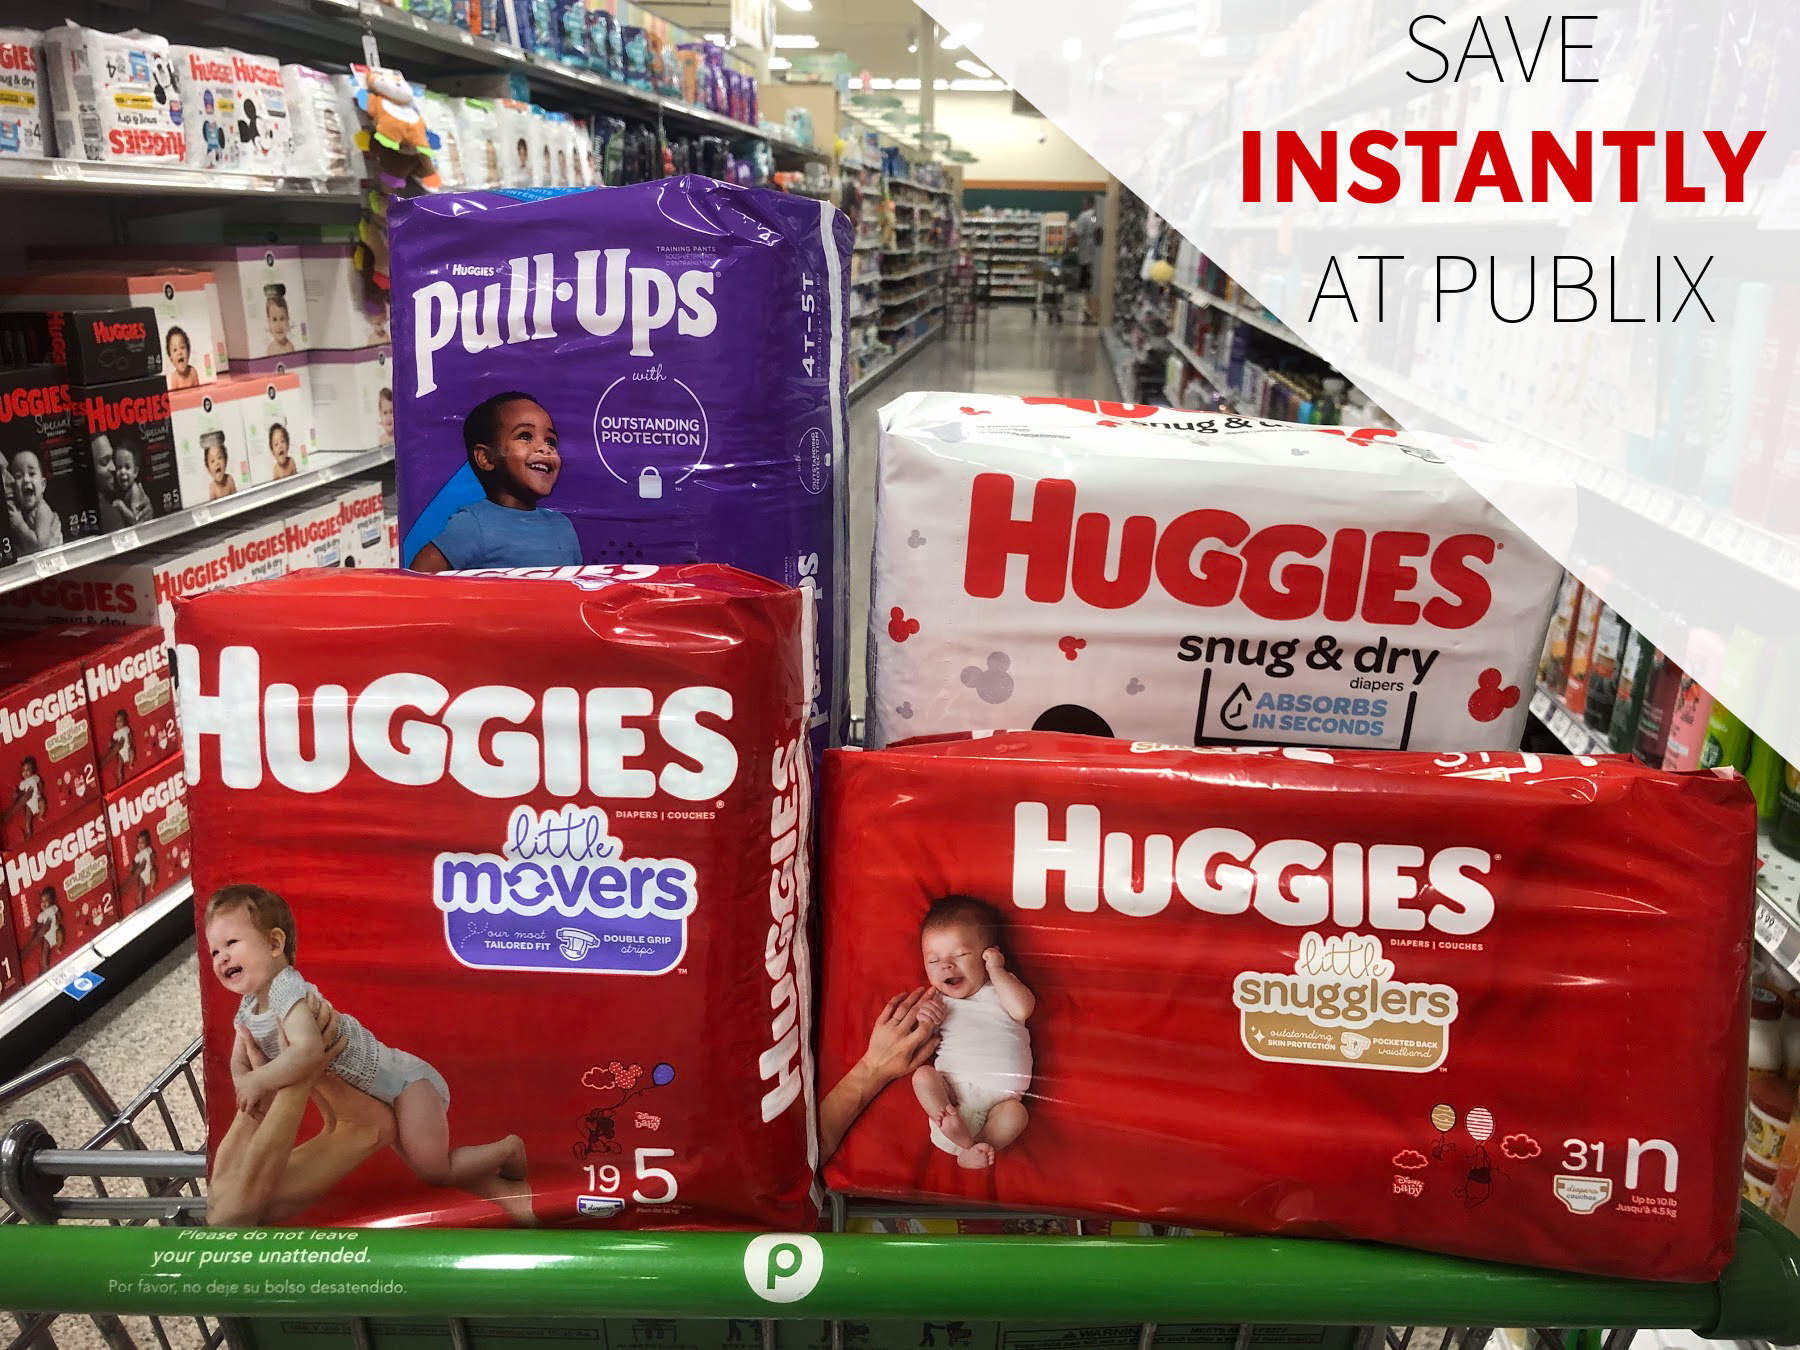 Get *INSTANT* Savings On Huggies Diapers & Pull-Ups This Week At Publix on I Heart Publix